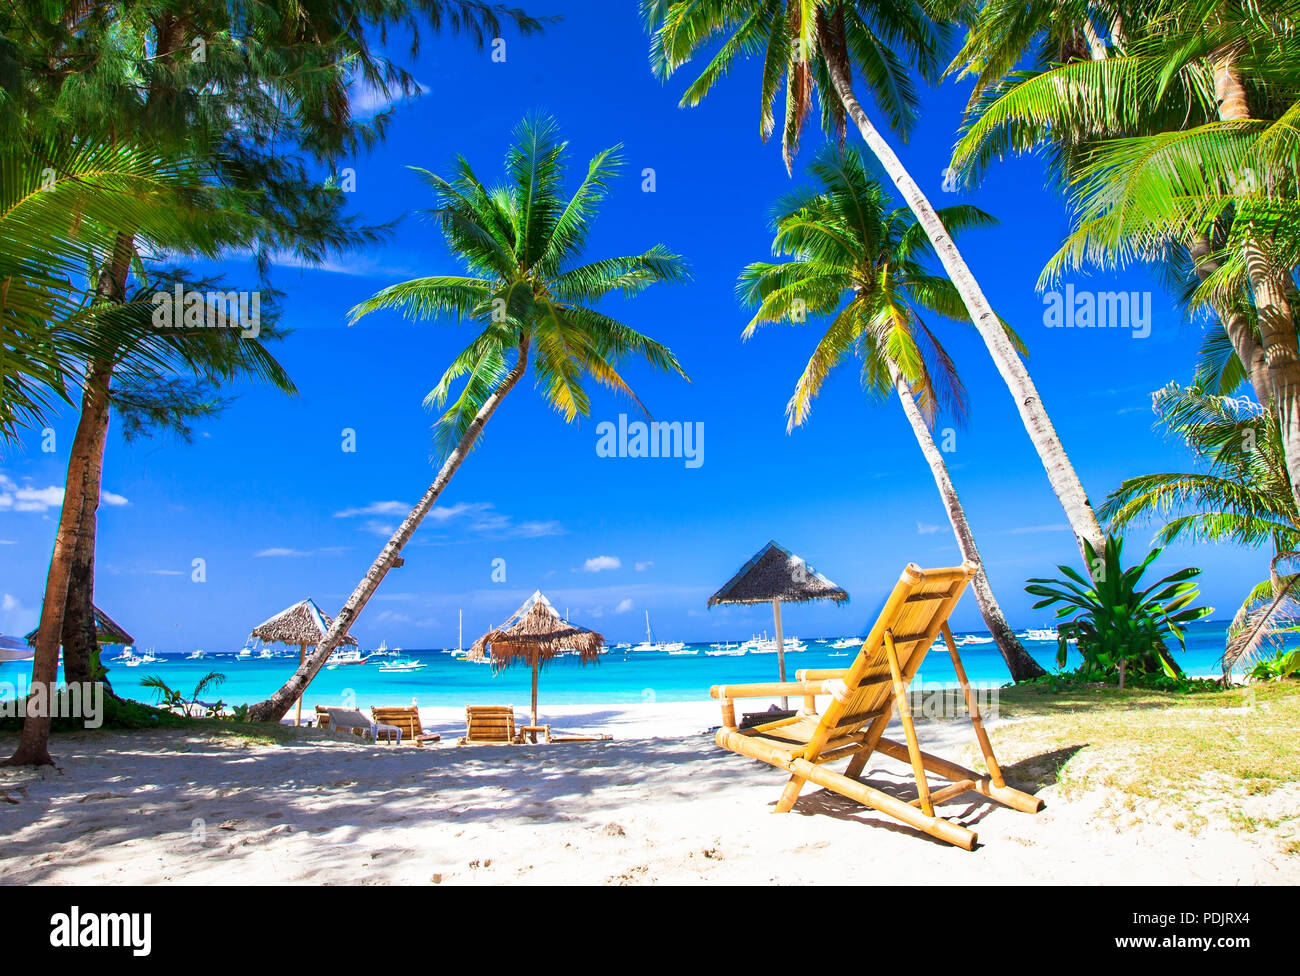 Beautiful Boracay island,view with palm trees azure sea and umbrellas,Philippines. Stock Photo